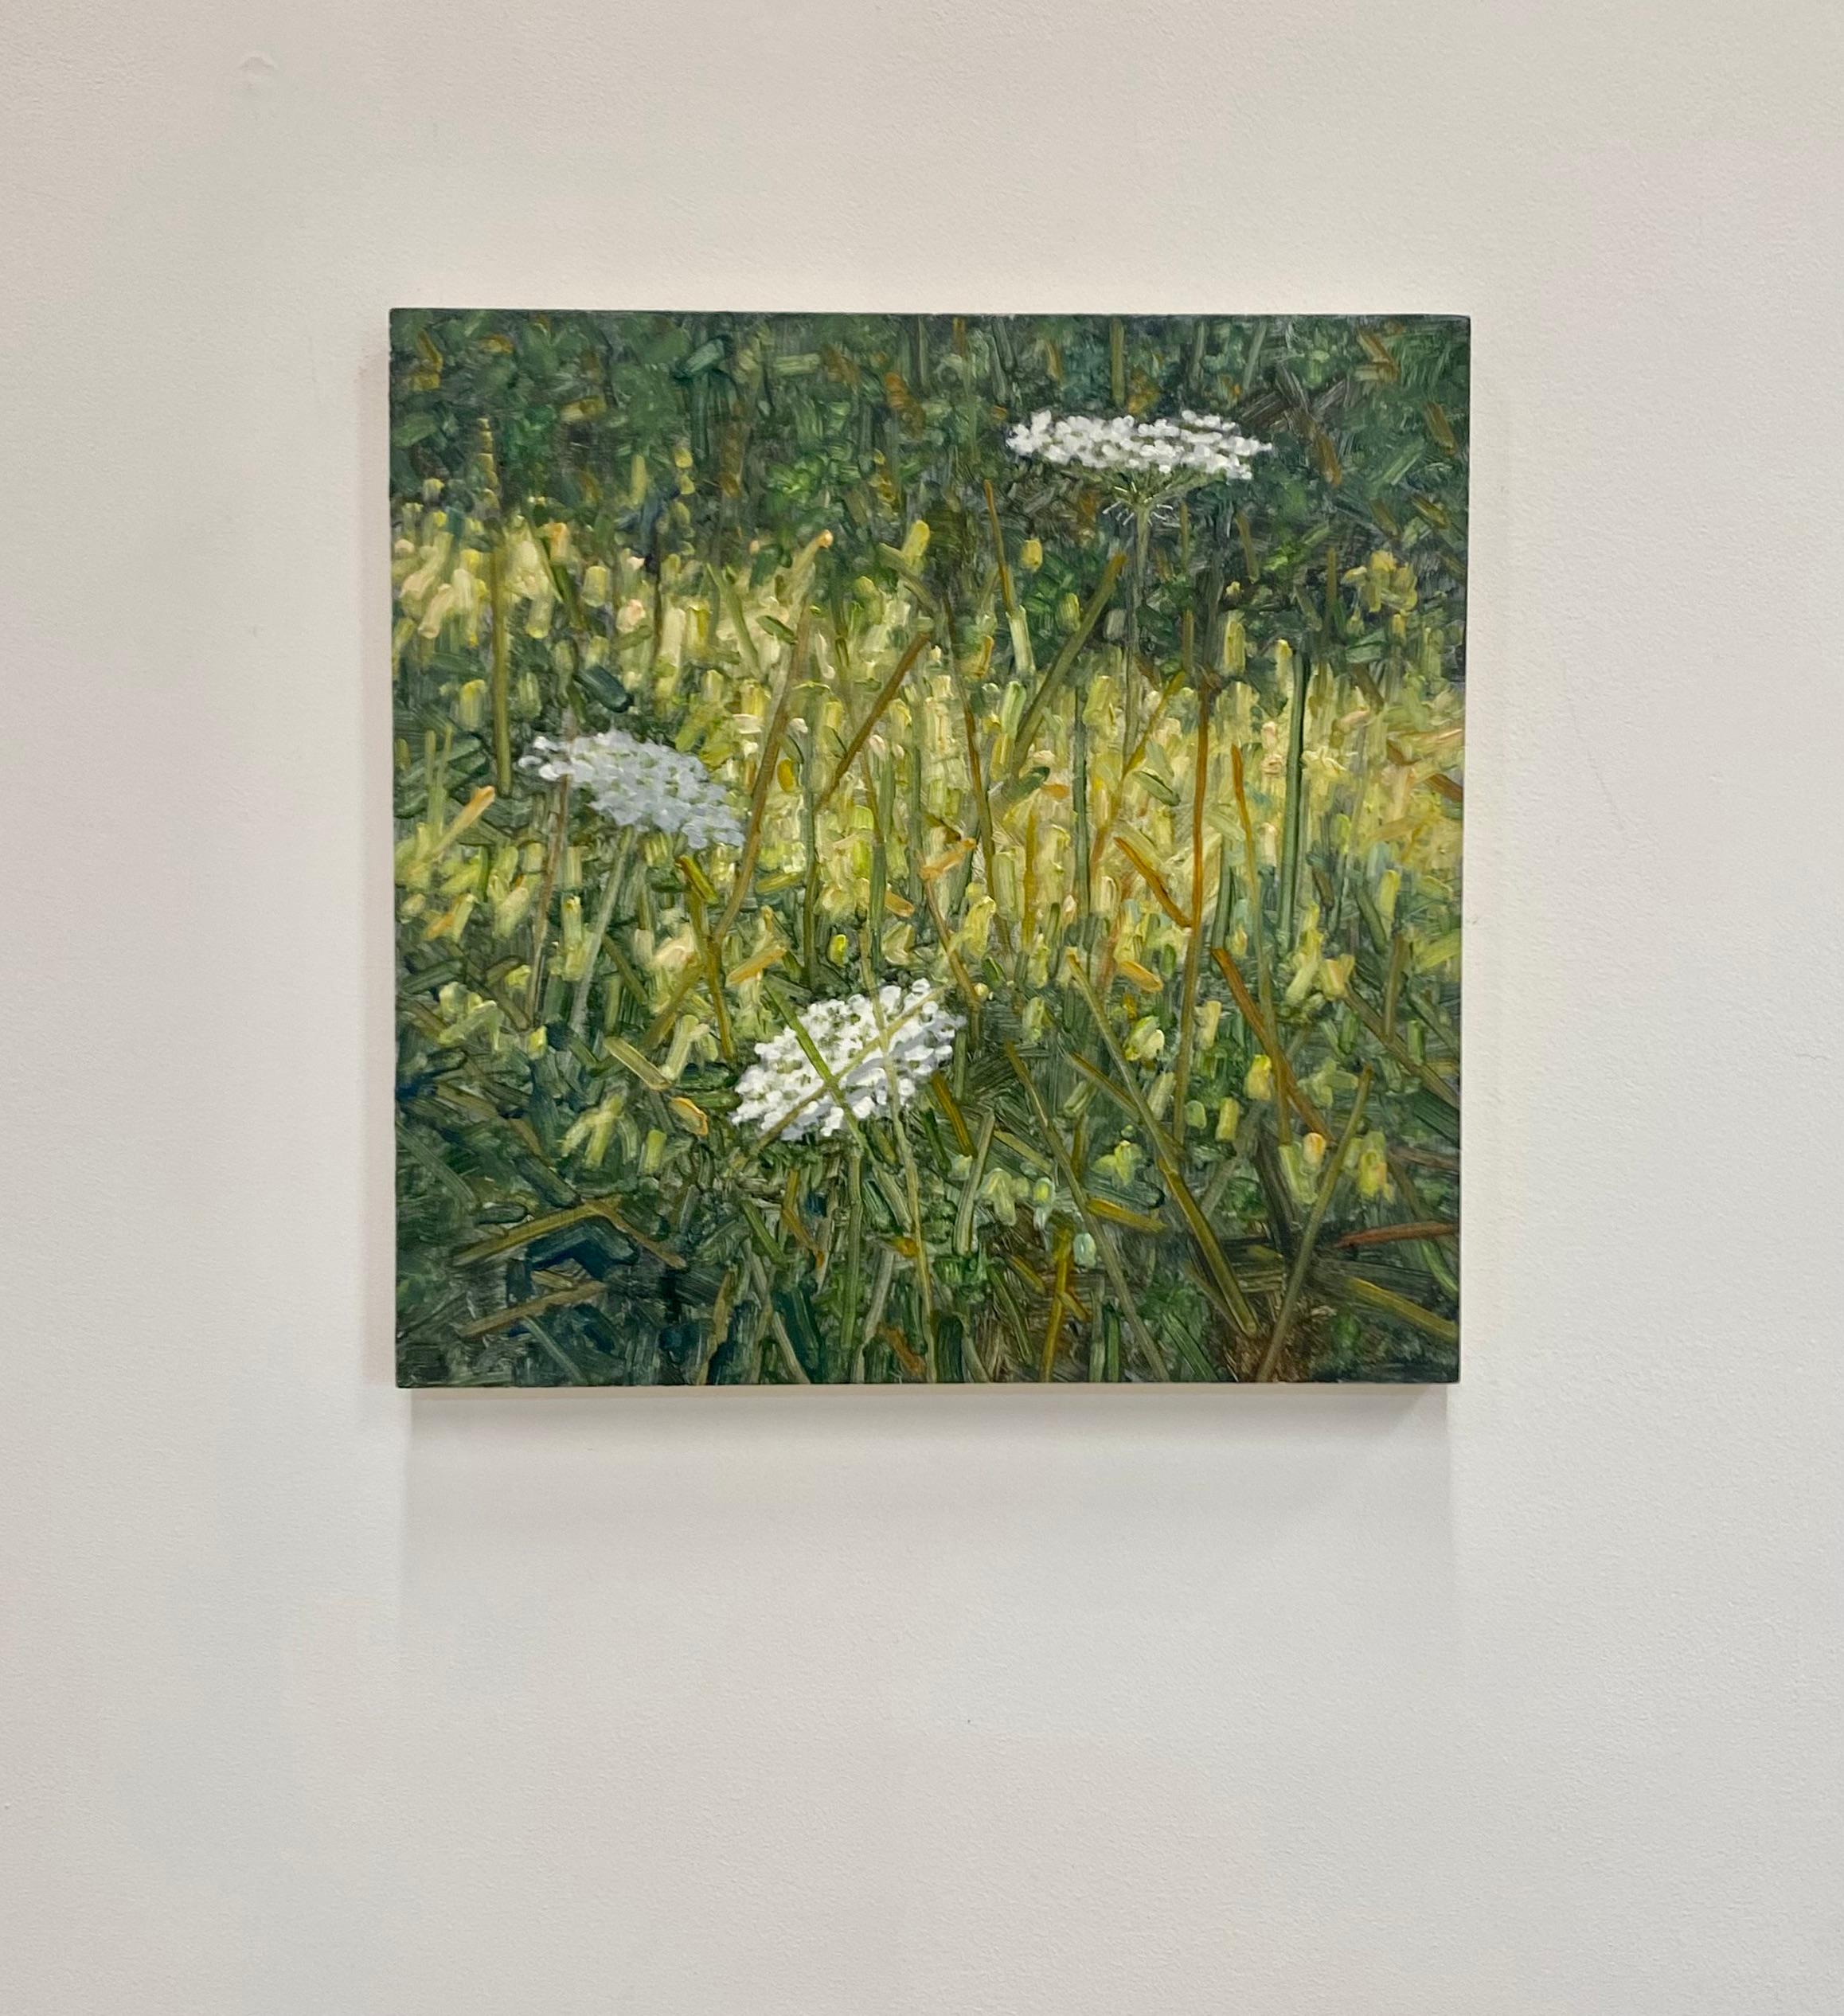 A peaceful outdoor scene with a grassy field with white Queen Anne's Lace flowers, beautifully capturing the idyllic feel of a field with wildflowers in July. Signed, dated and titled on verso.

The paintings of Thomas Sarrantonio seek to mediate